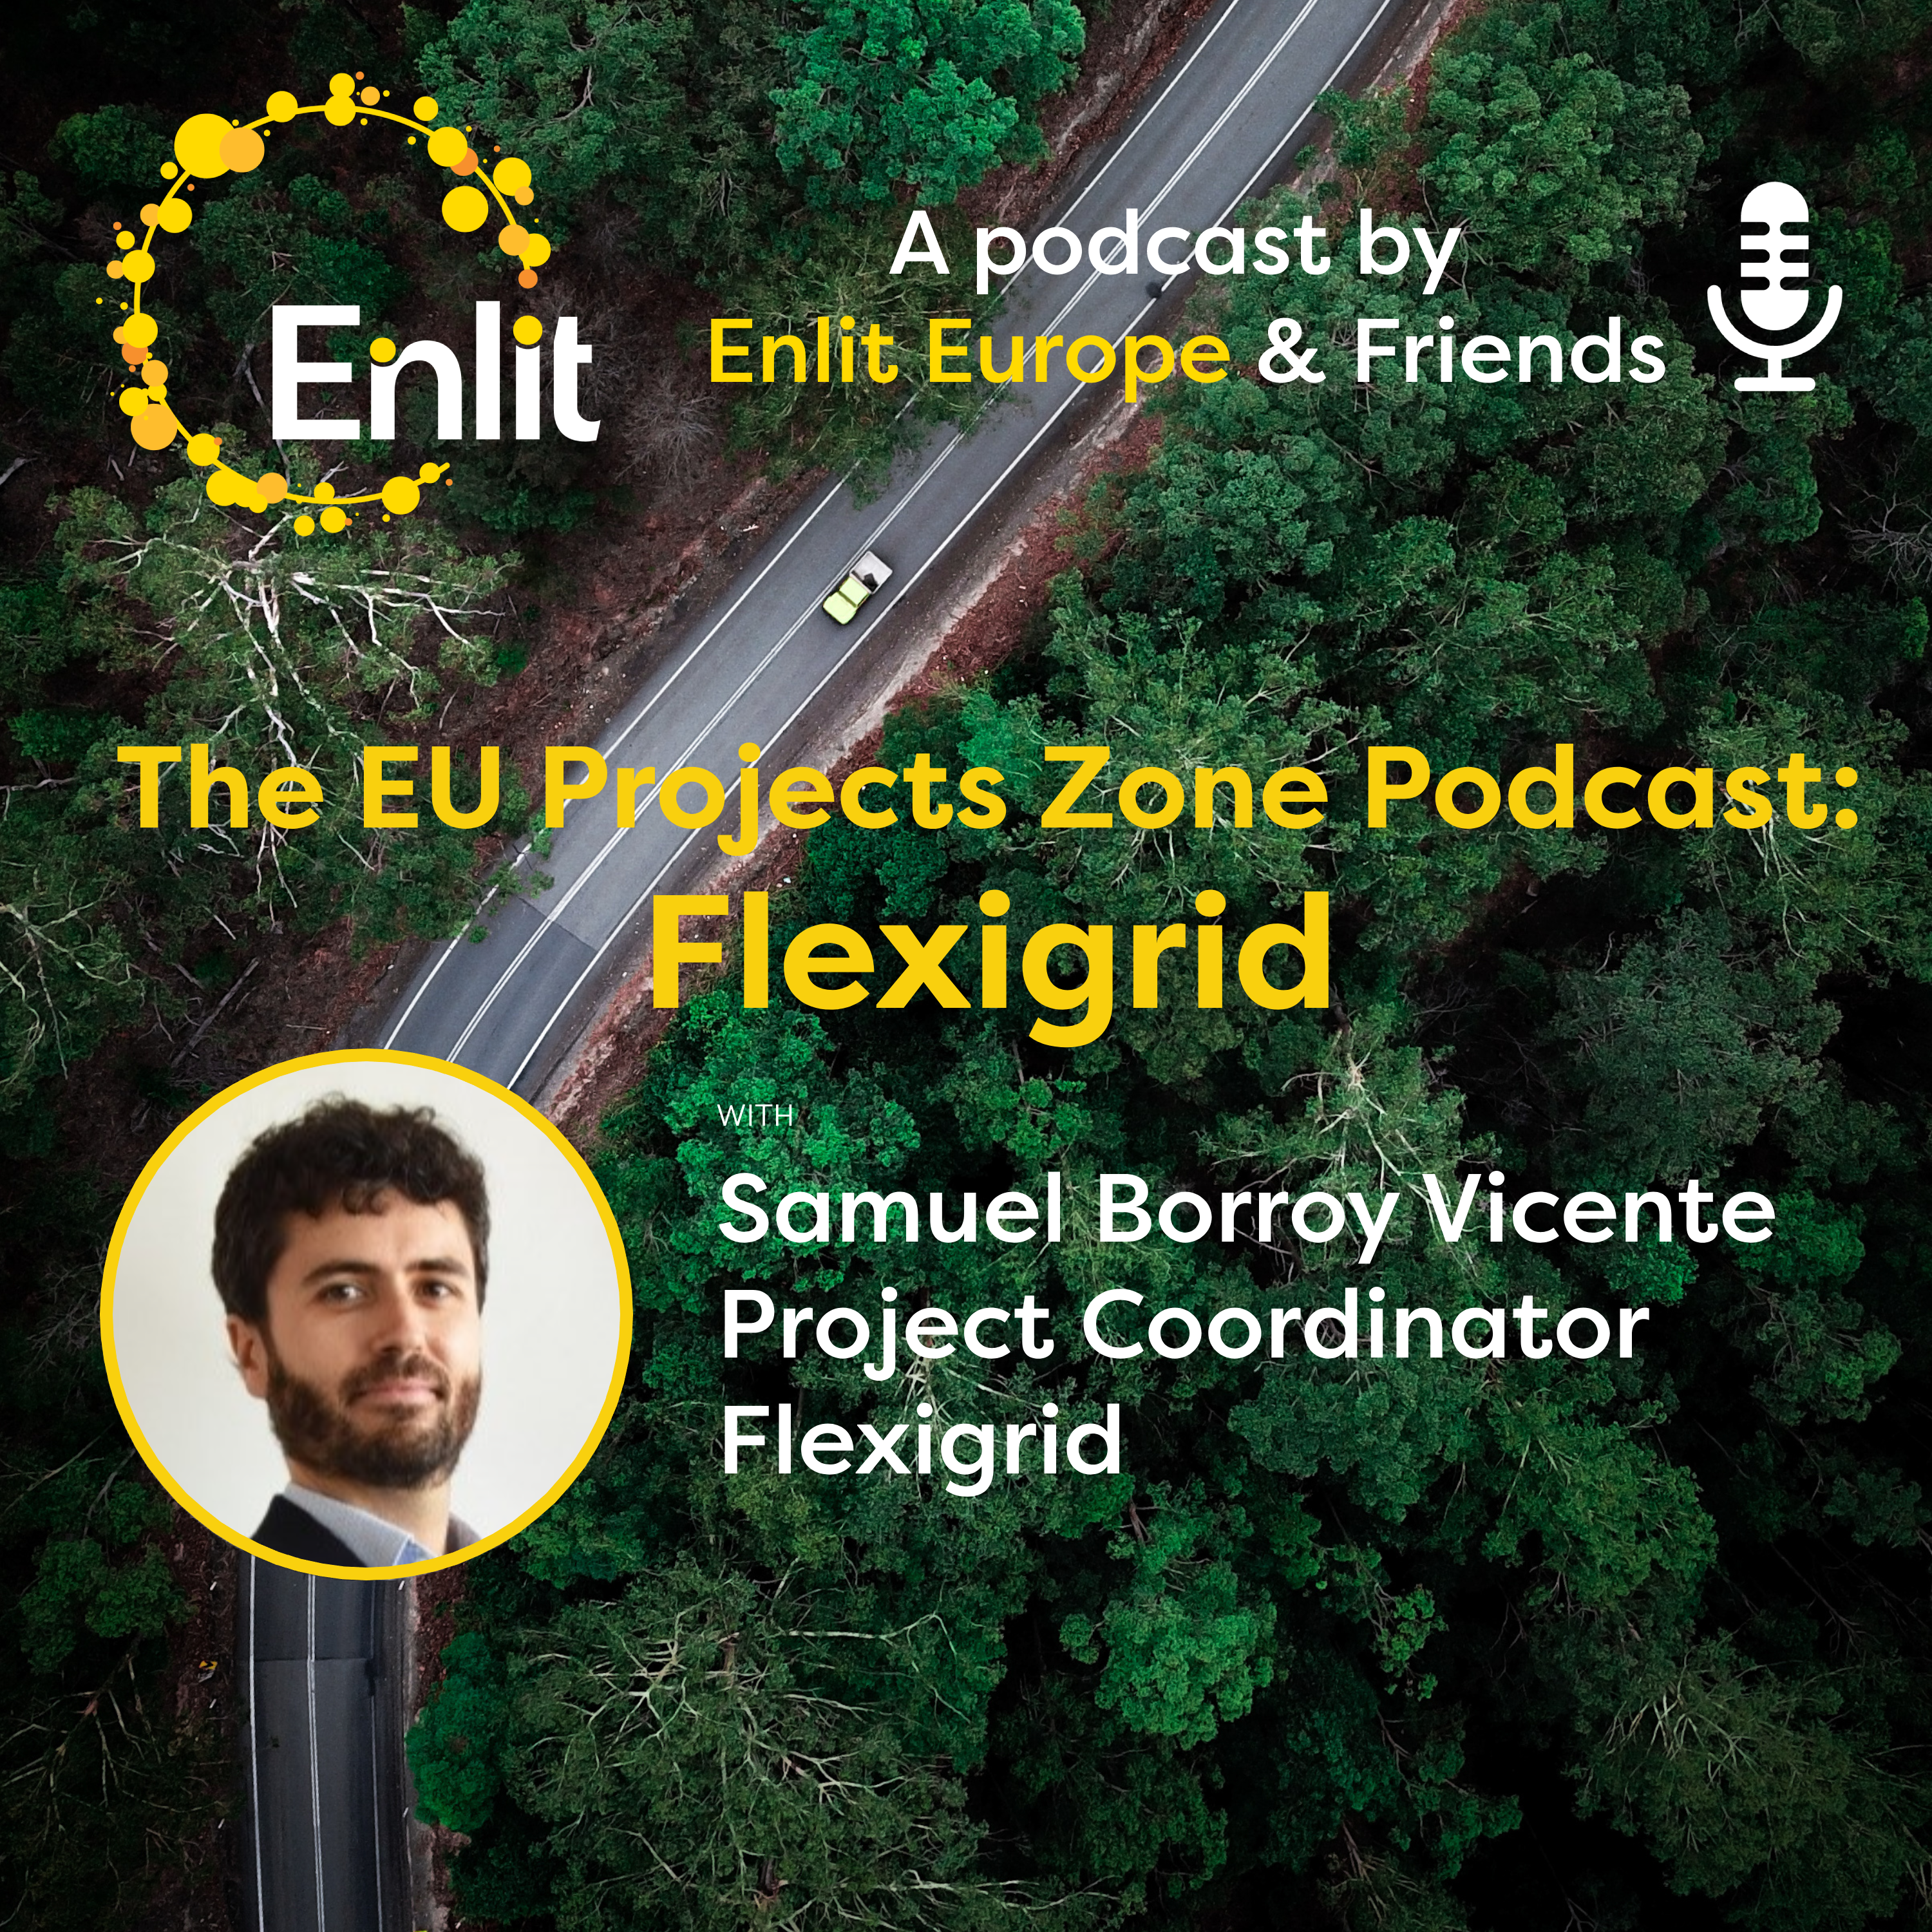 The EU Projects Zone Podcast: FLEXIGRID with Samuel Borroy Vicente